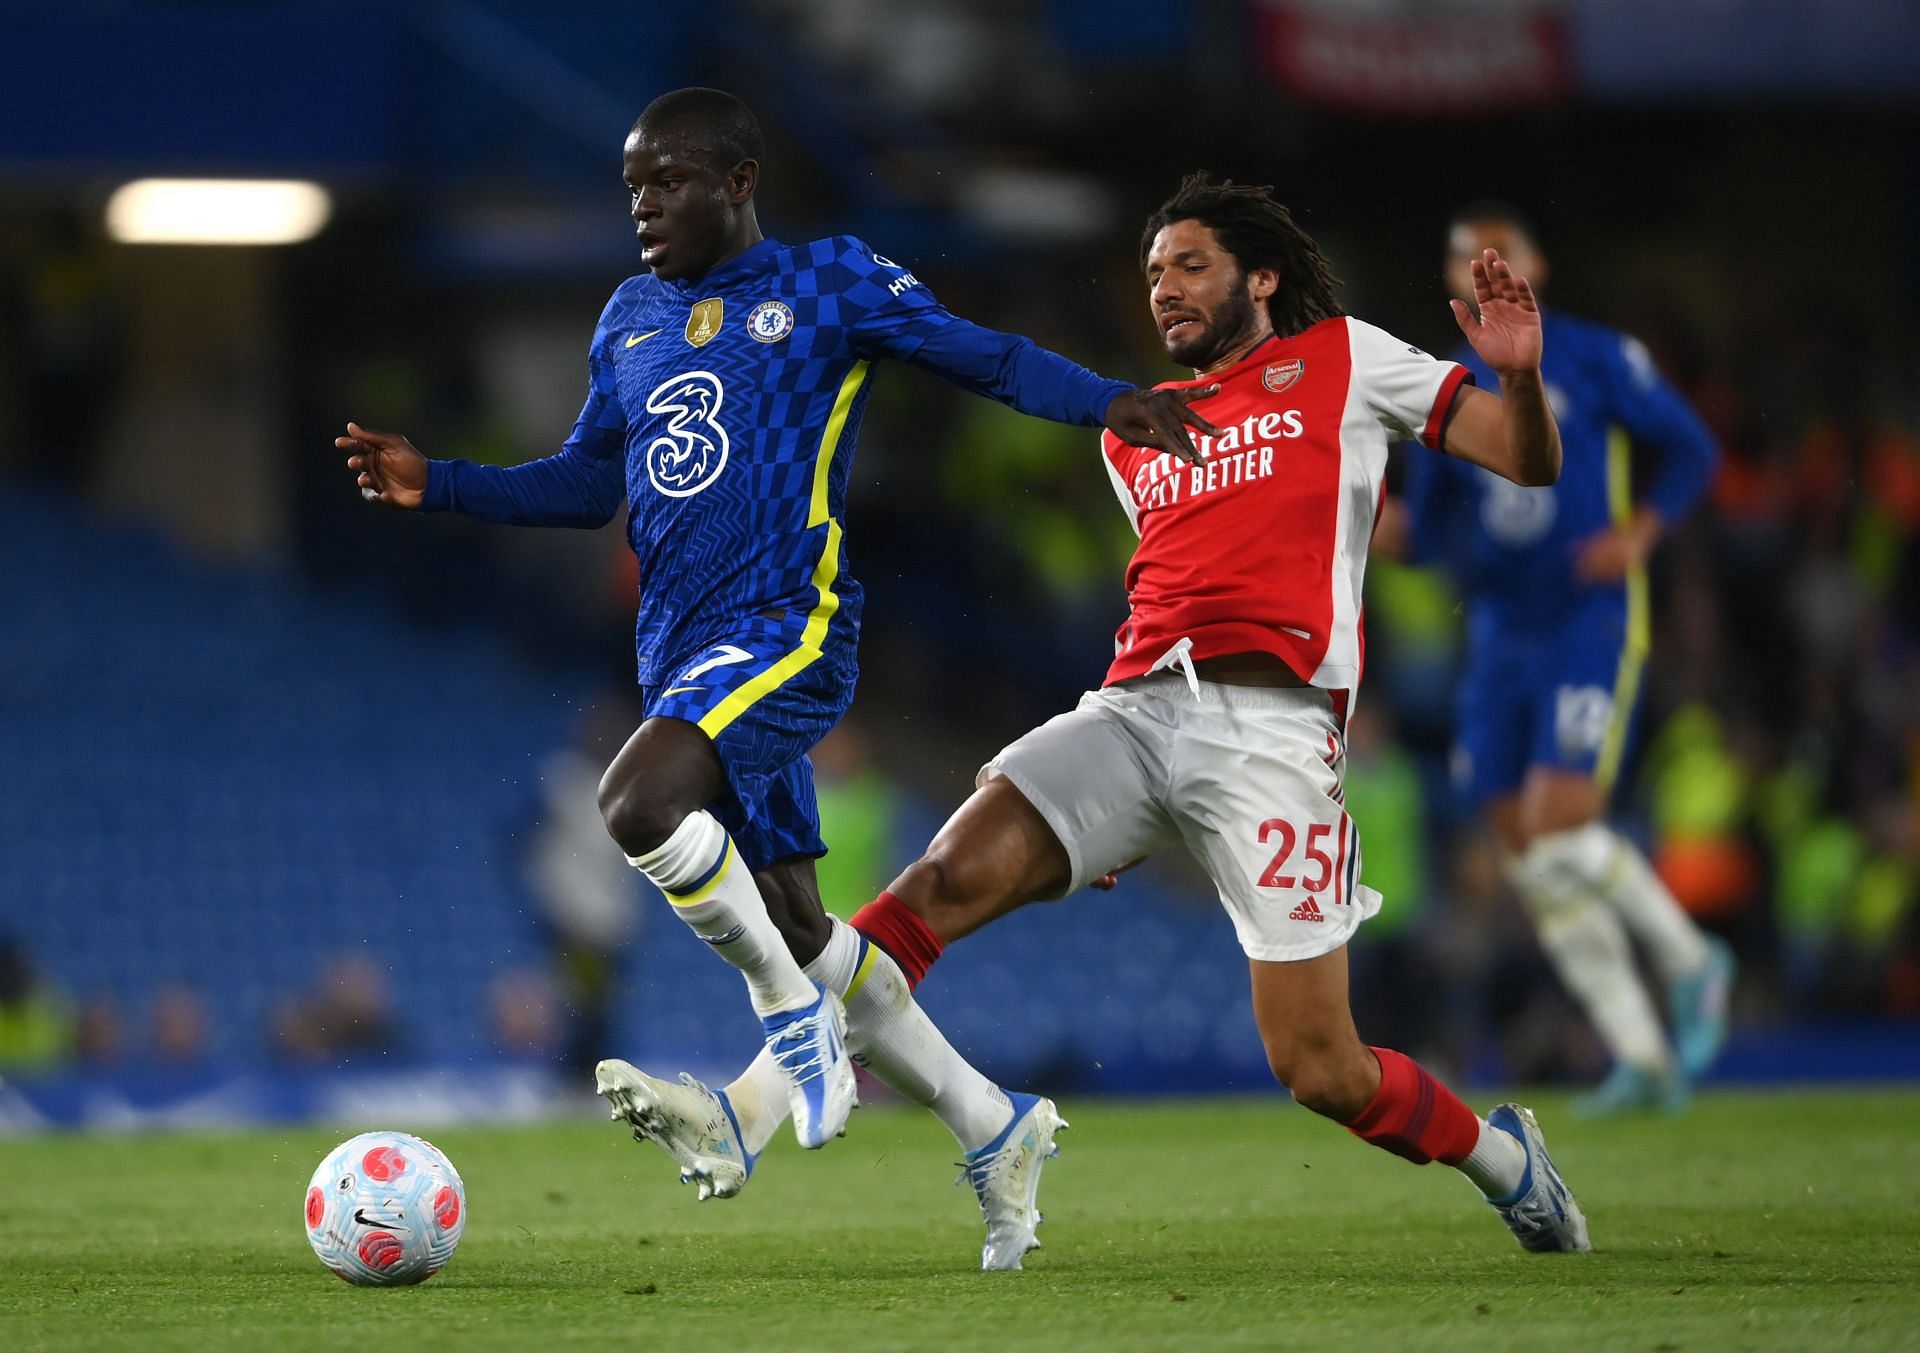 Bent wants Kante to join the Gunners